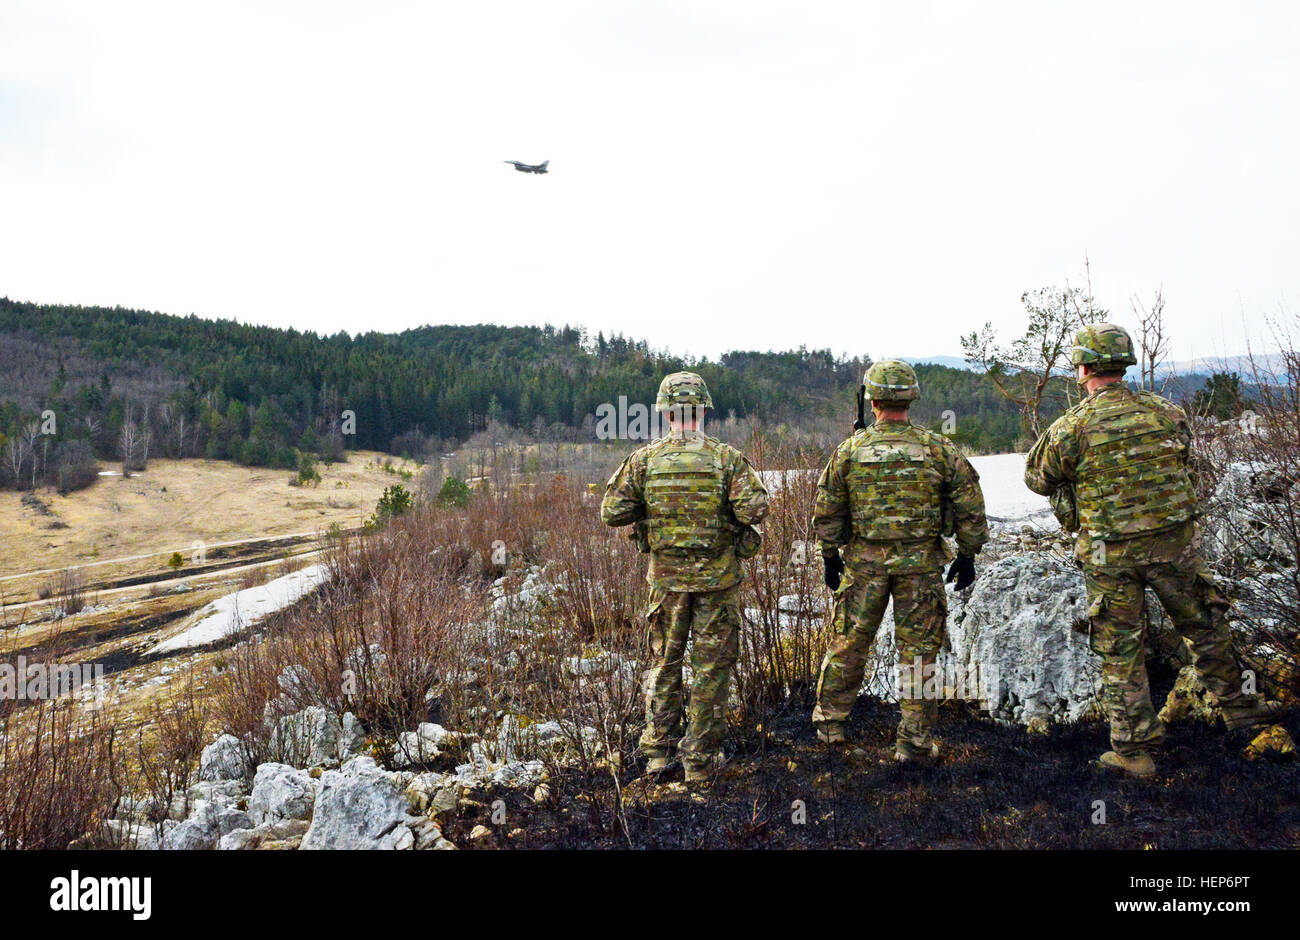 U.S. Army paratroopers assigned to the Company B, 2nd Battalion, 503rd Infantry Regiment, 173rd Airborne Brigade, observe a U.S. Air Force F-16 Falcon during close air s upport training at Pocek Range in Postonja, Slovenia, March 12, 2015. (U.S. Army photo by Visual Information Specialist Massimo Bovo/Released) Slovenia live close air support March 12, 2015 150312-A-DZ412-004 Stock Photo